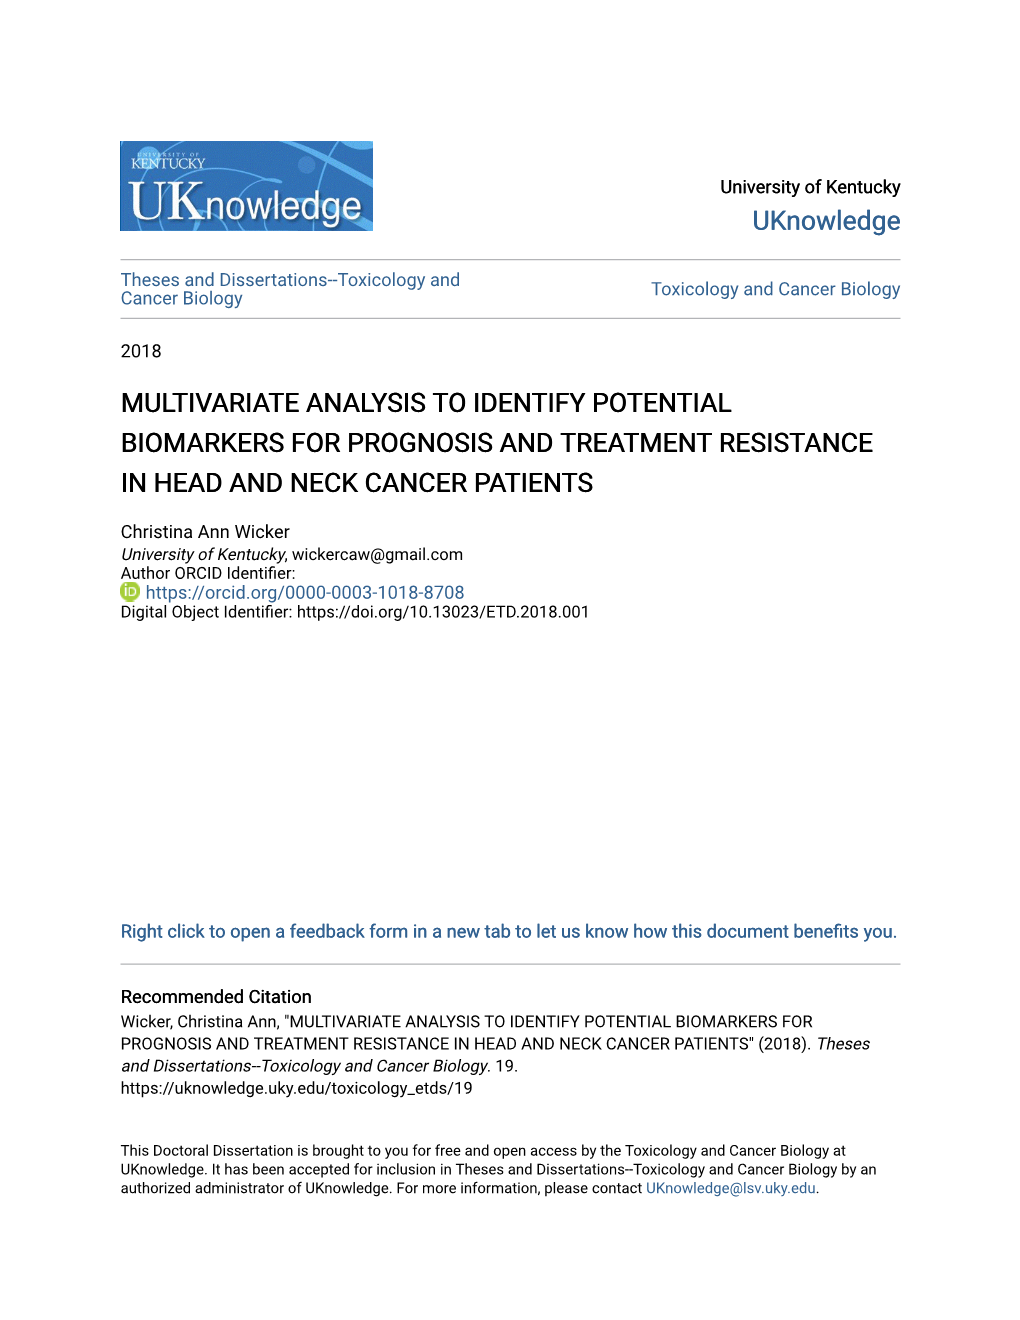 Multivariate Analysis to Identify Potential Biomarkers for Prognosis and Treatment Resistance in Head and Neck Cancer Patients